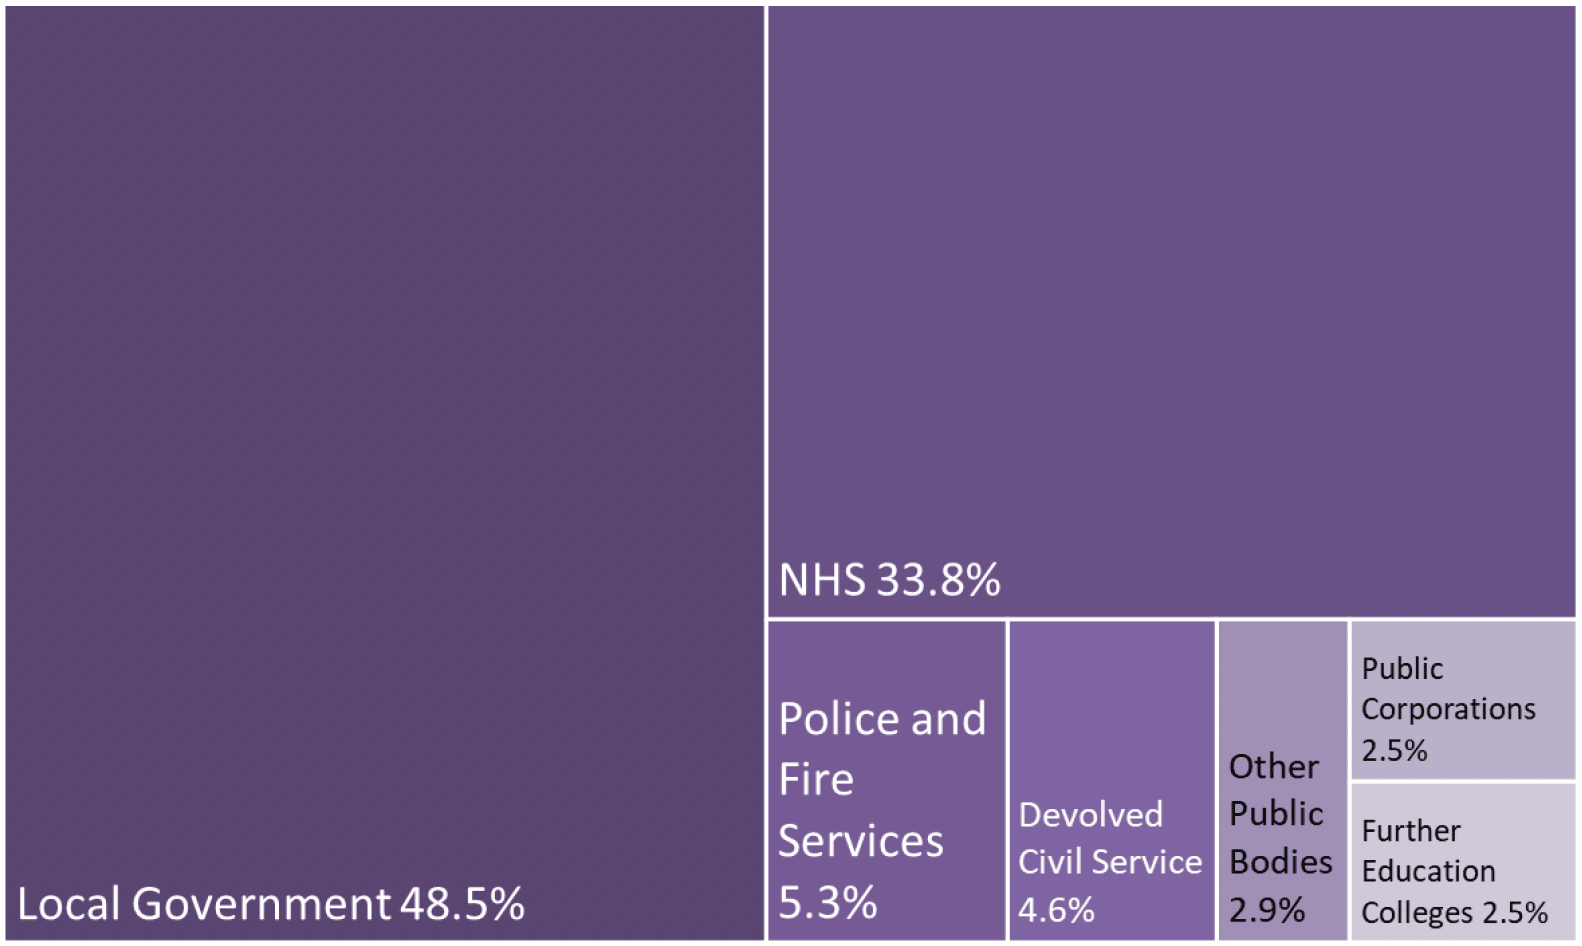 tree map of devolved Public Sector Employment showing relative size of public bodies 